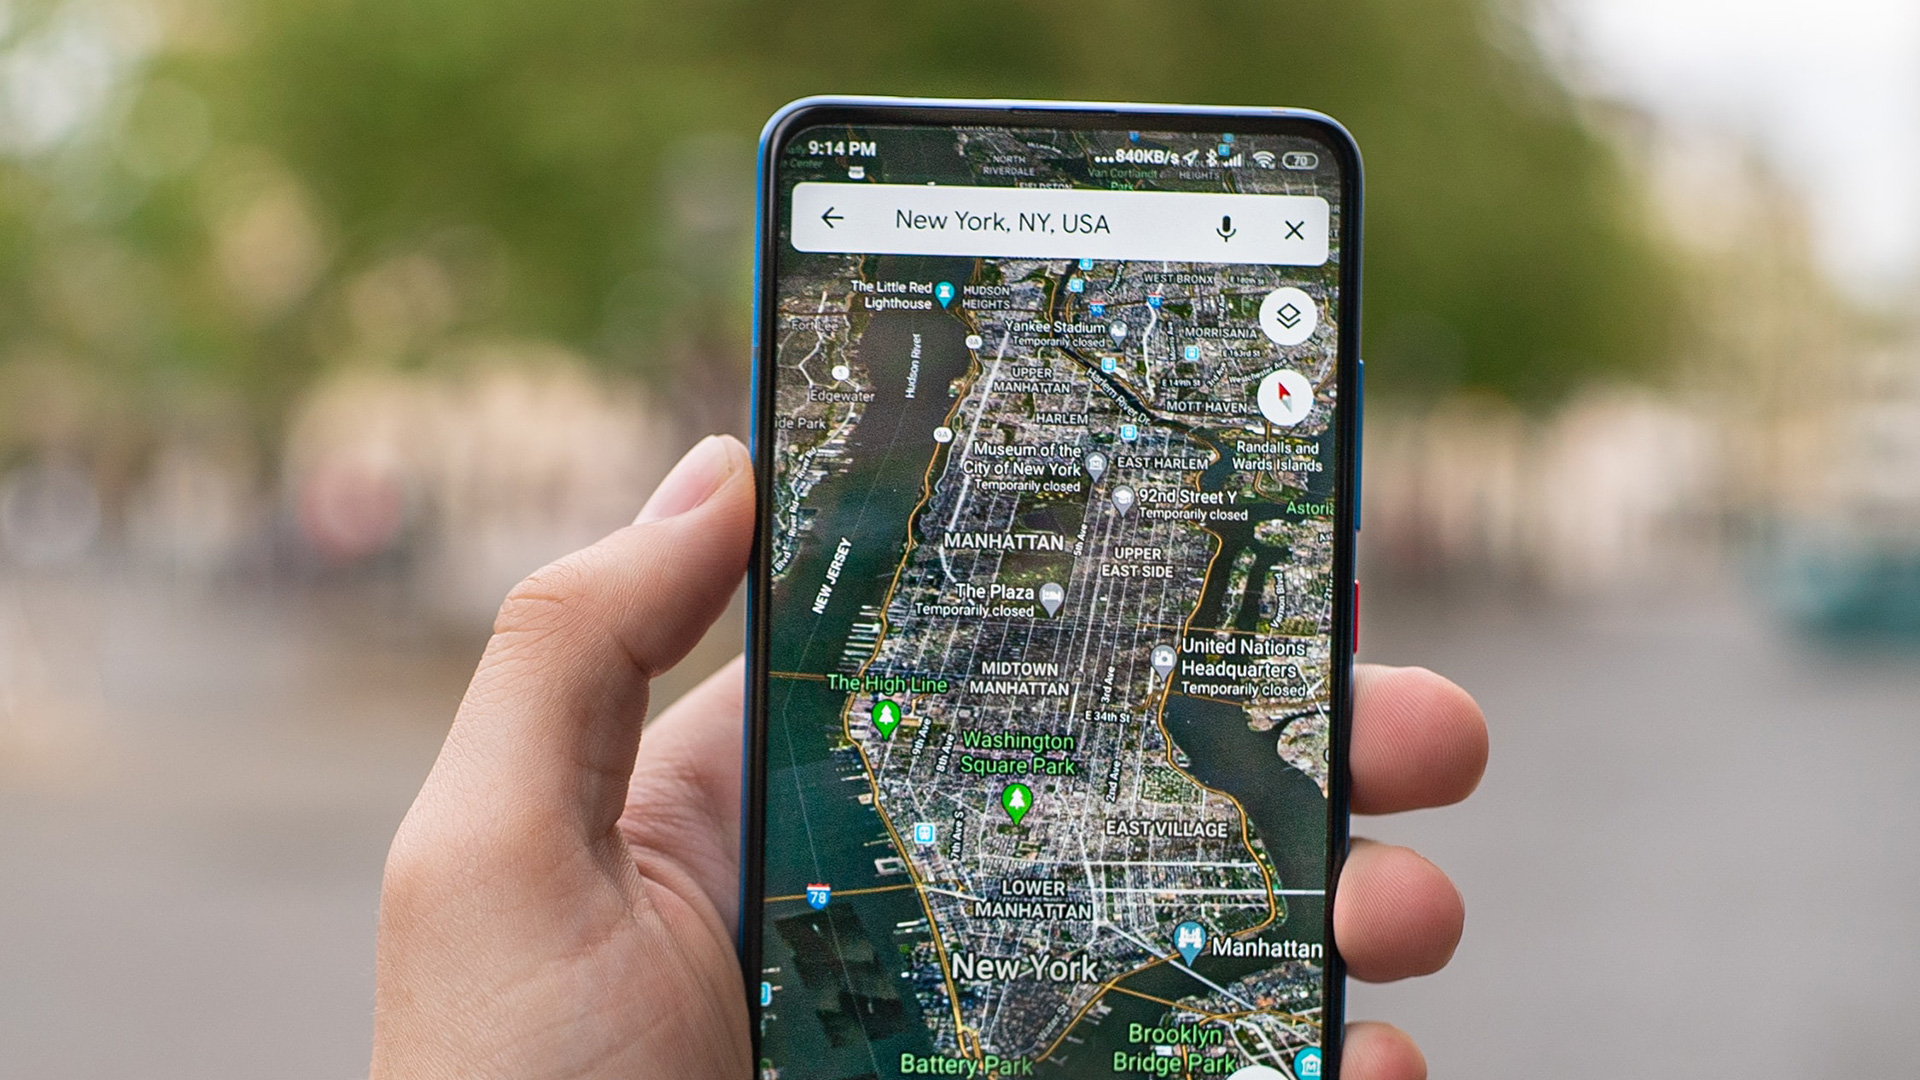 google maps on android shows New York City